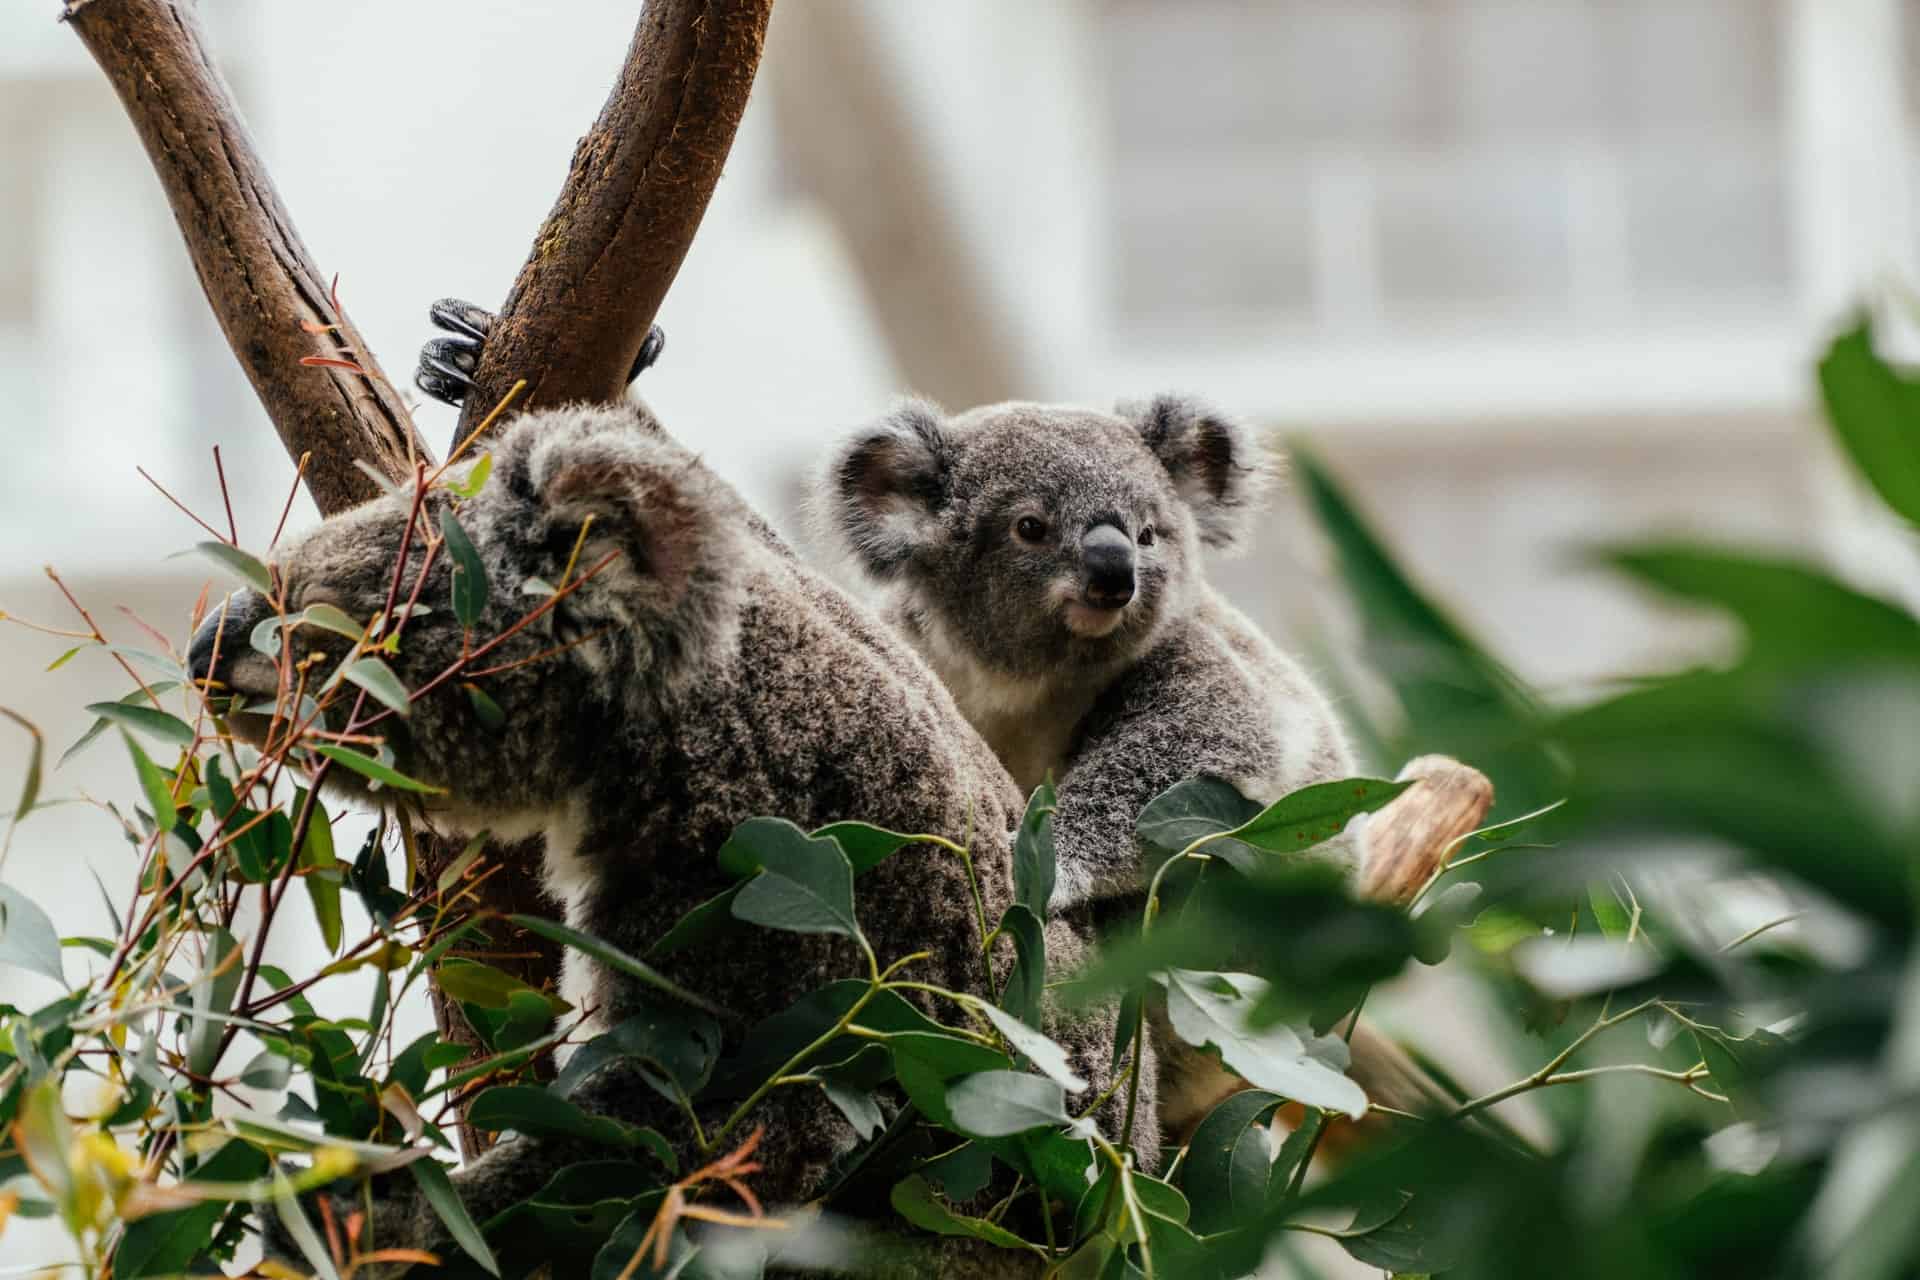 Best things to do in Sydney Australia - Linda King - Koalas in a tree at the zoo by Henrique Félix on Unsplash